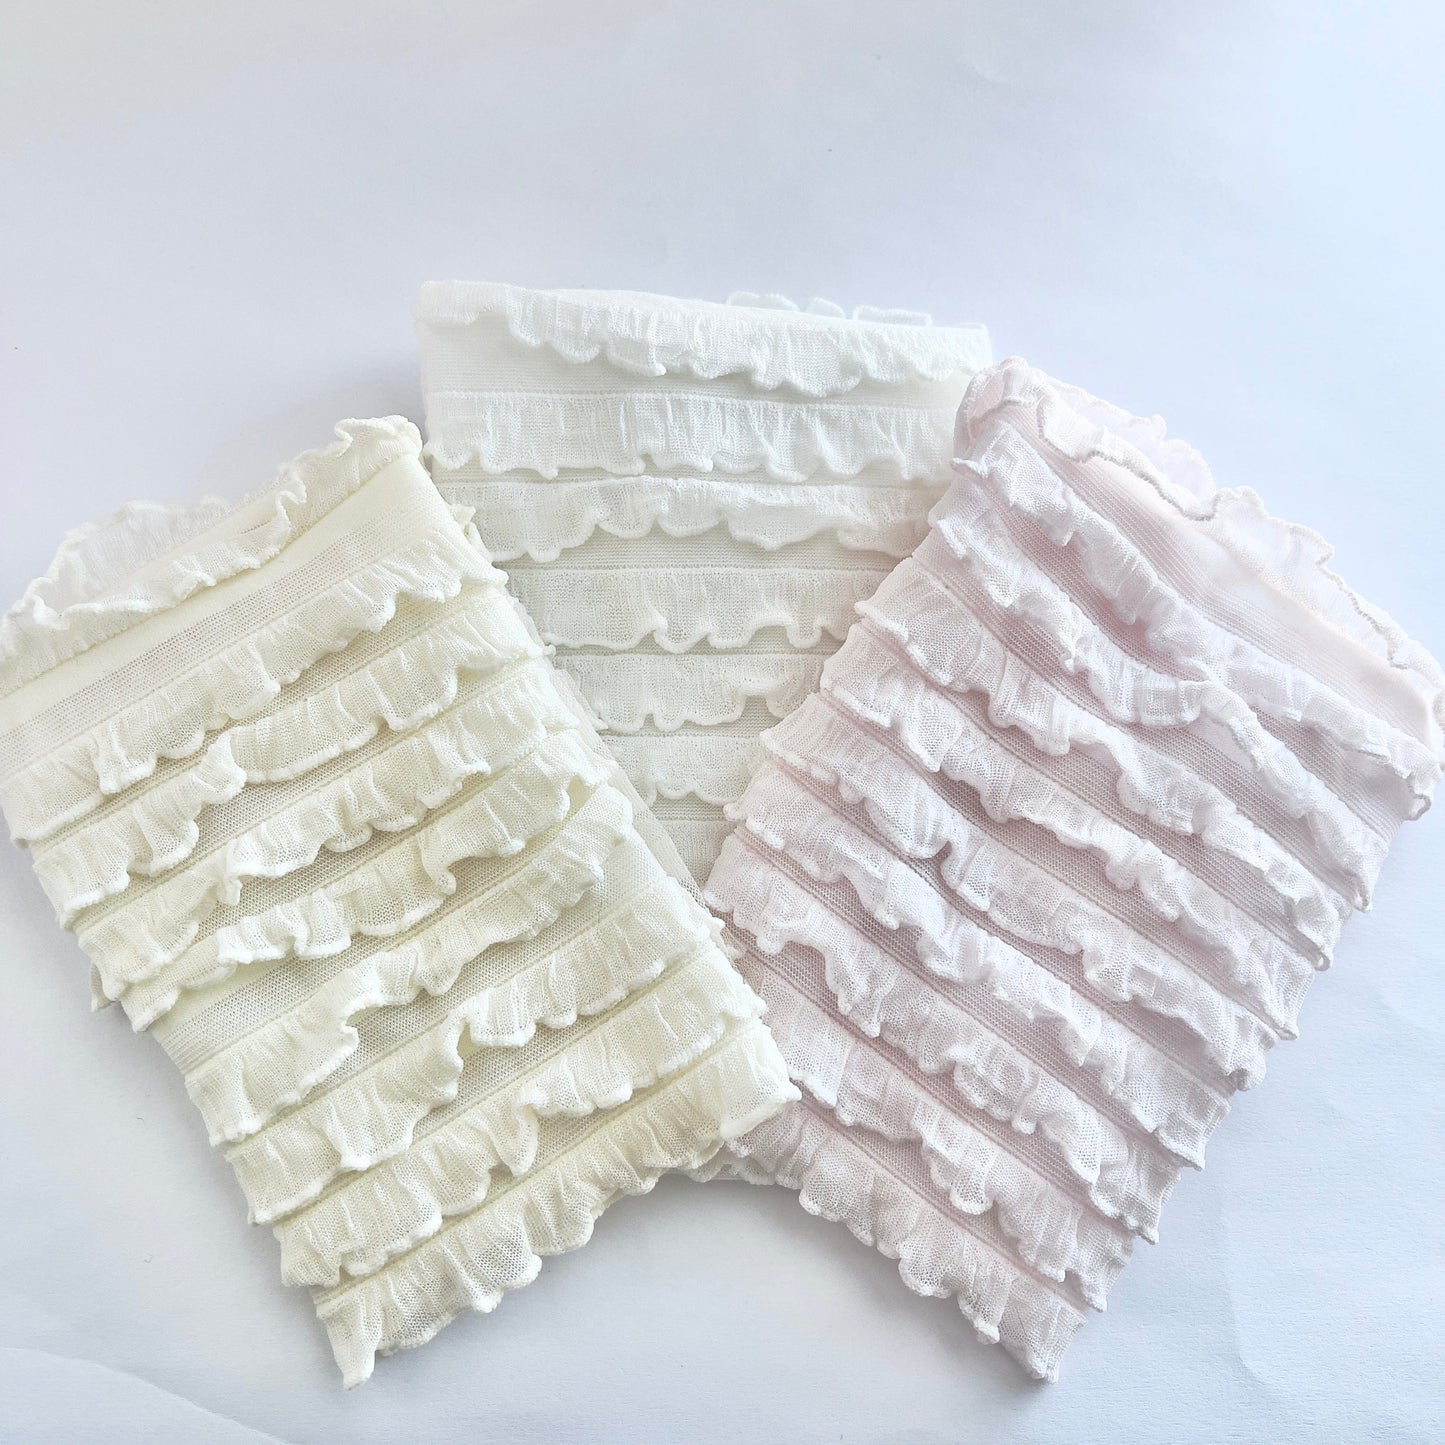 CHANTALLENA Cream/Pink/White Set of 3 Ruffled Throws At Home | Romantic Poly Knit Petite Ruffled Cascading Throw